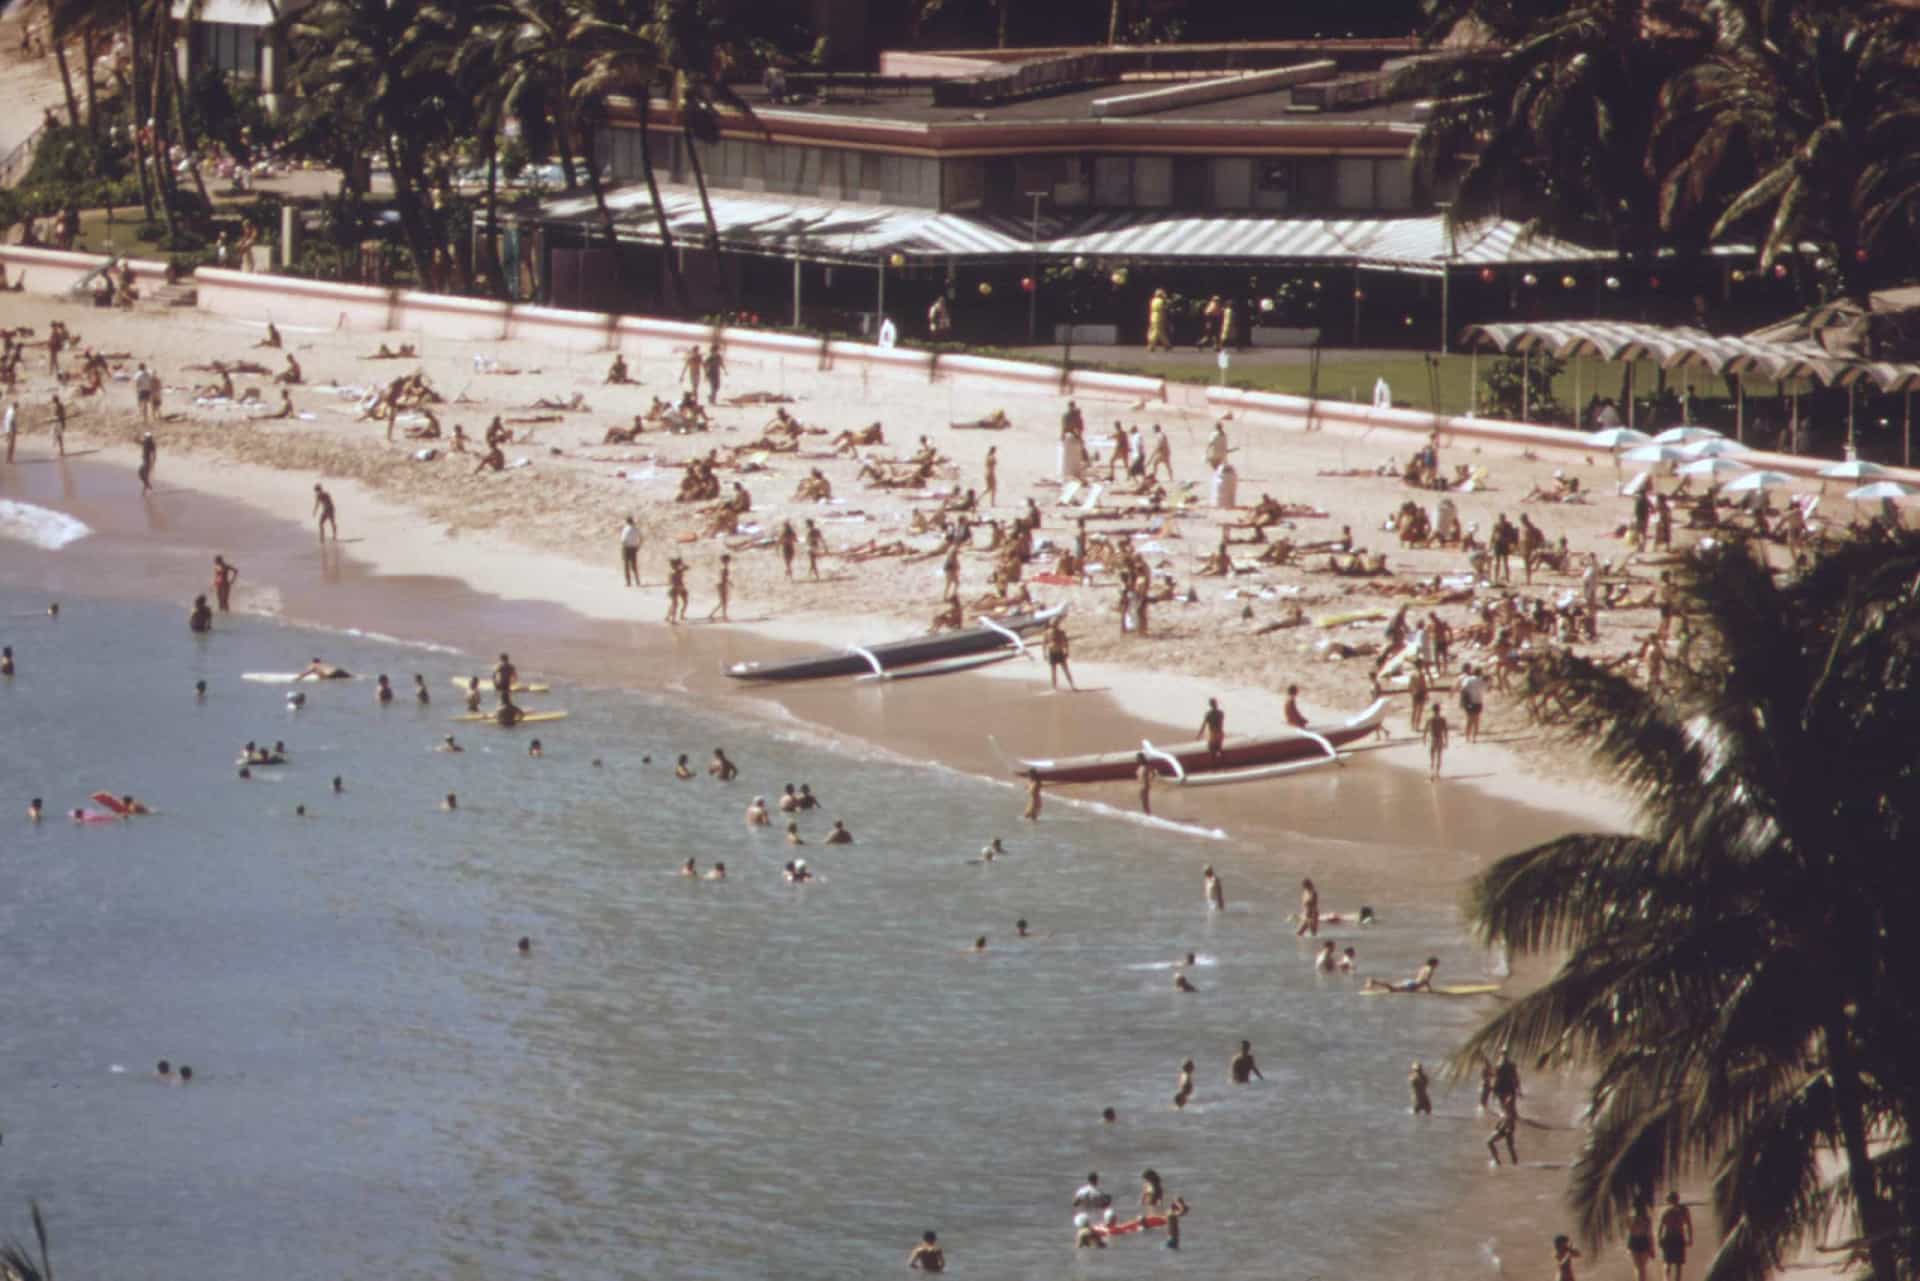 <p>Waikiki Beach became a hot destination for both its easy access from the mainland and everything else Hawaii is famous for: beaches, surfing, sunshine, and cool Polynesian culture. </p>